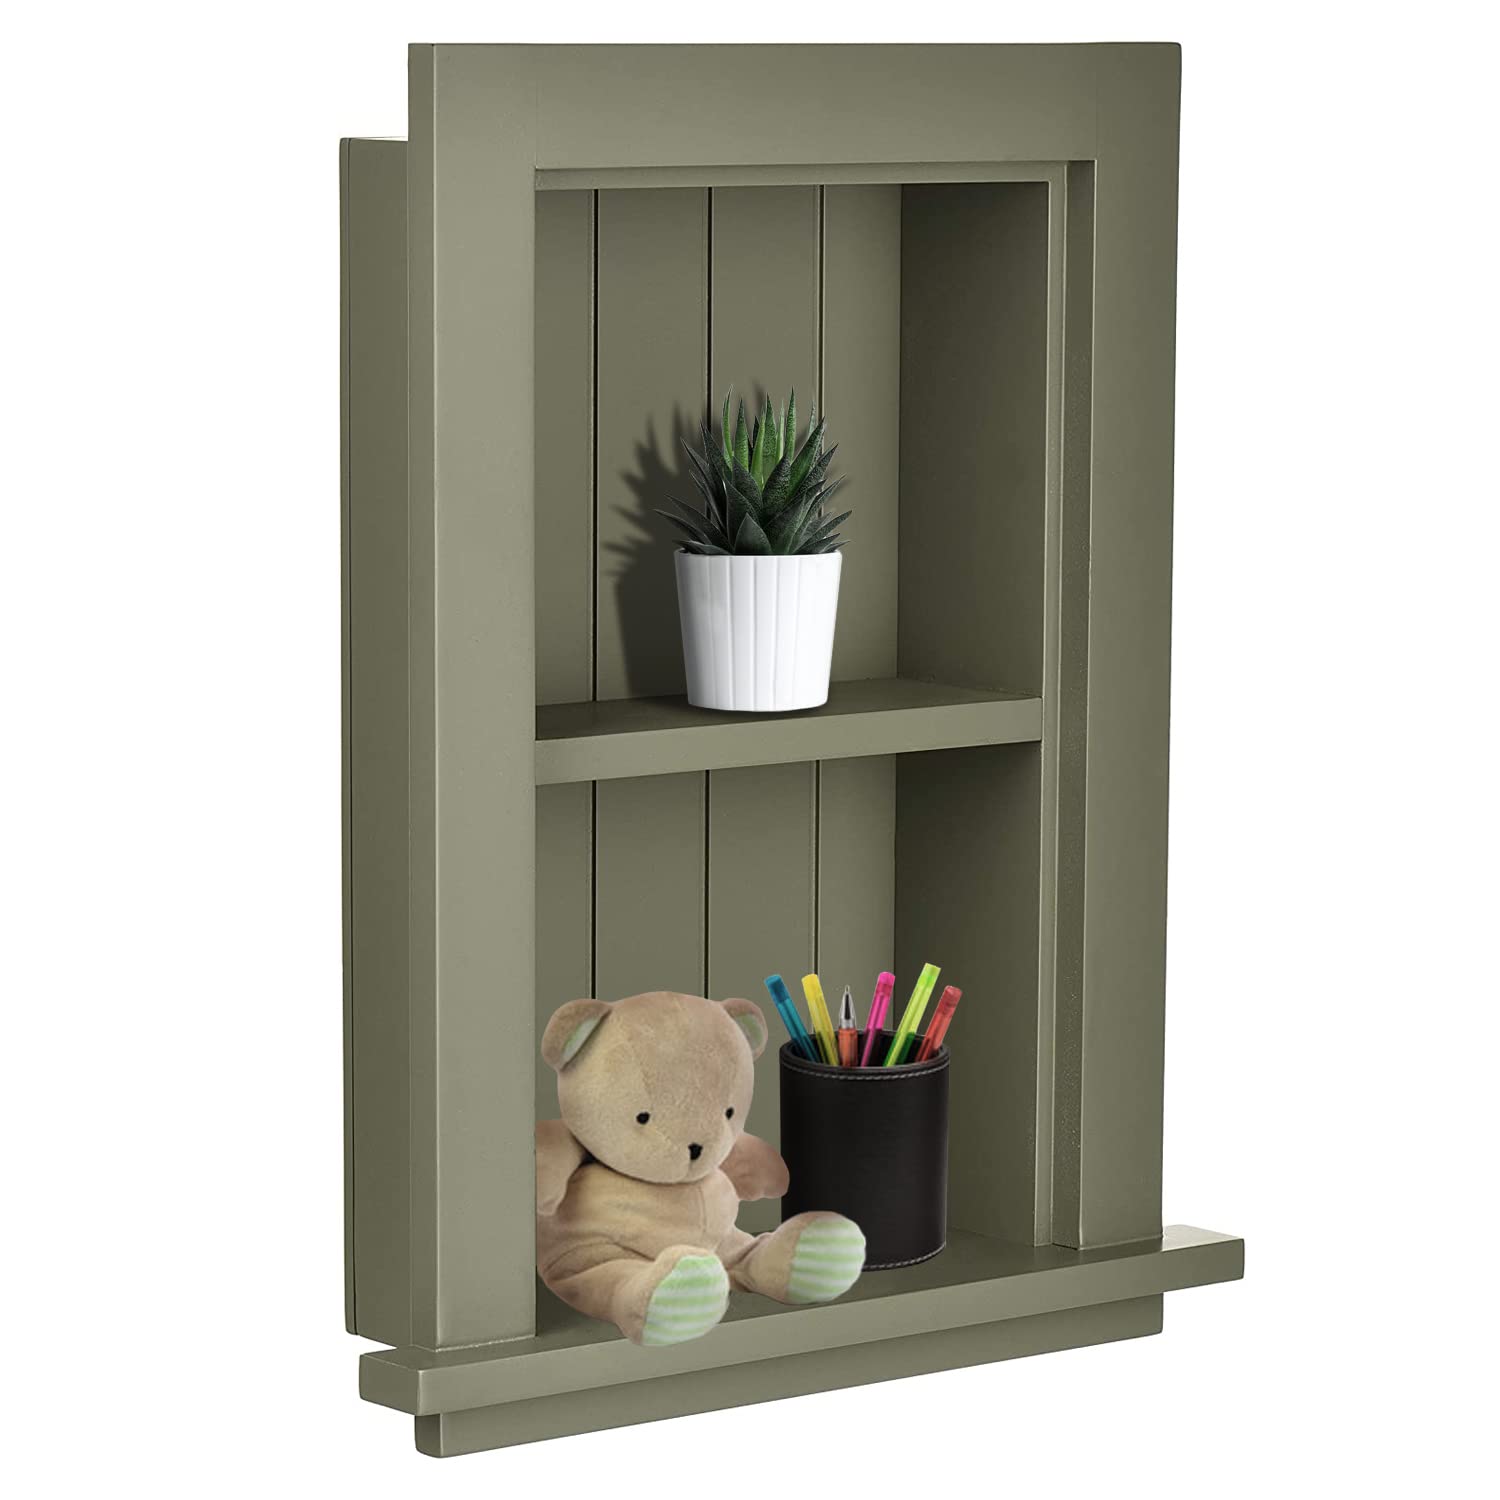 AdirHome Recessed Wall Mount Storage Cabinet � Sturdy Fully Assembled Wooden Utility Storage Shelf � Ideal for Home Kitchen, Bathroom, Laundry, Medicine Cabinet (Green)  - Acceptable